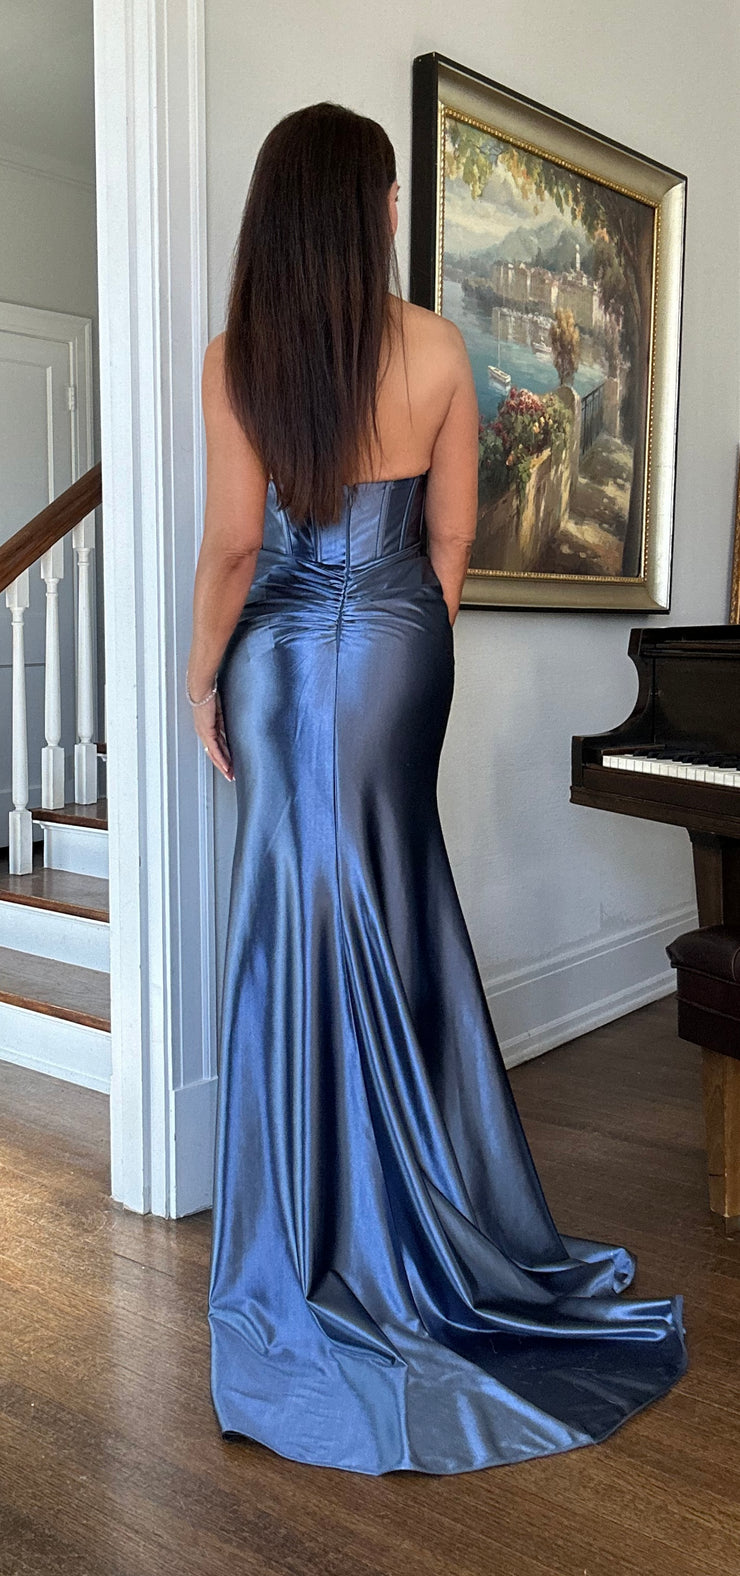 Angelina Smoke blue satin halter corset gown with slit